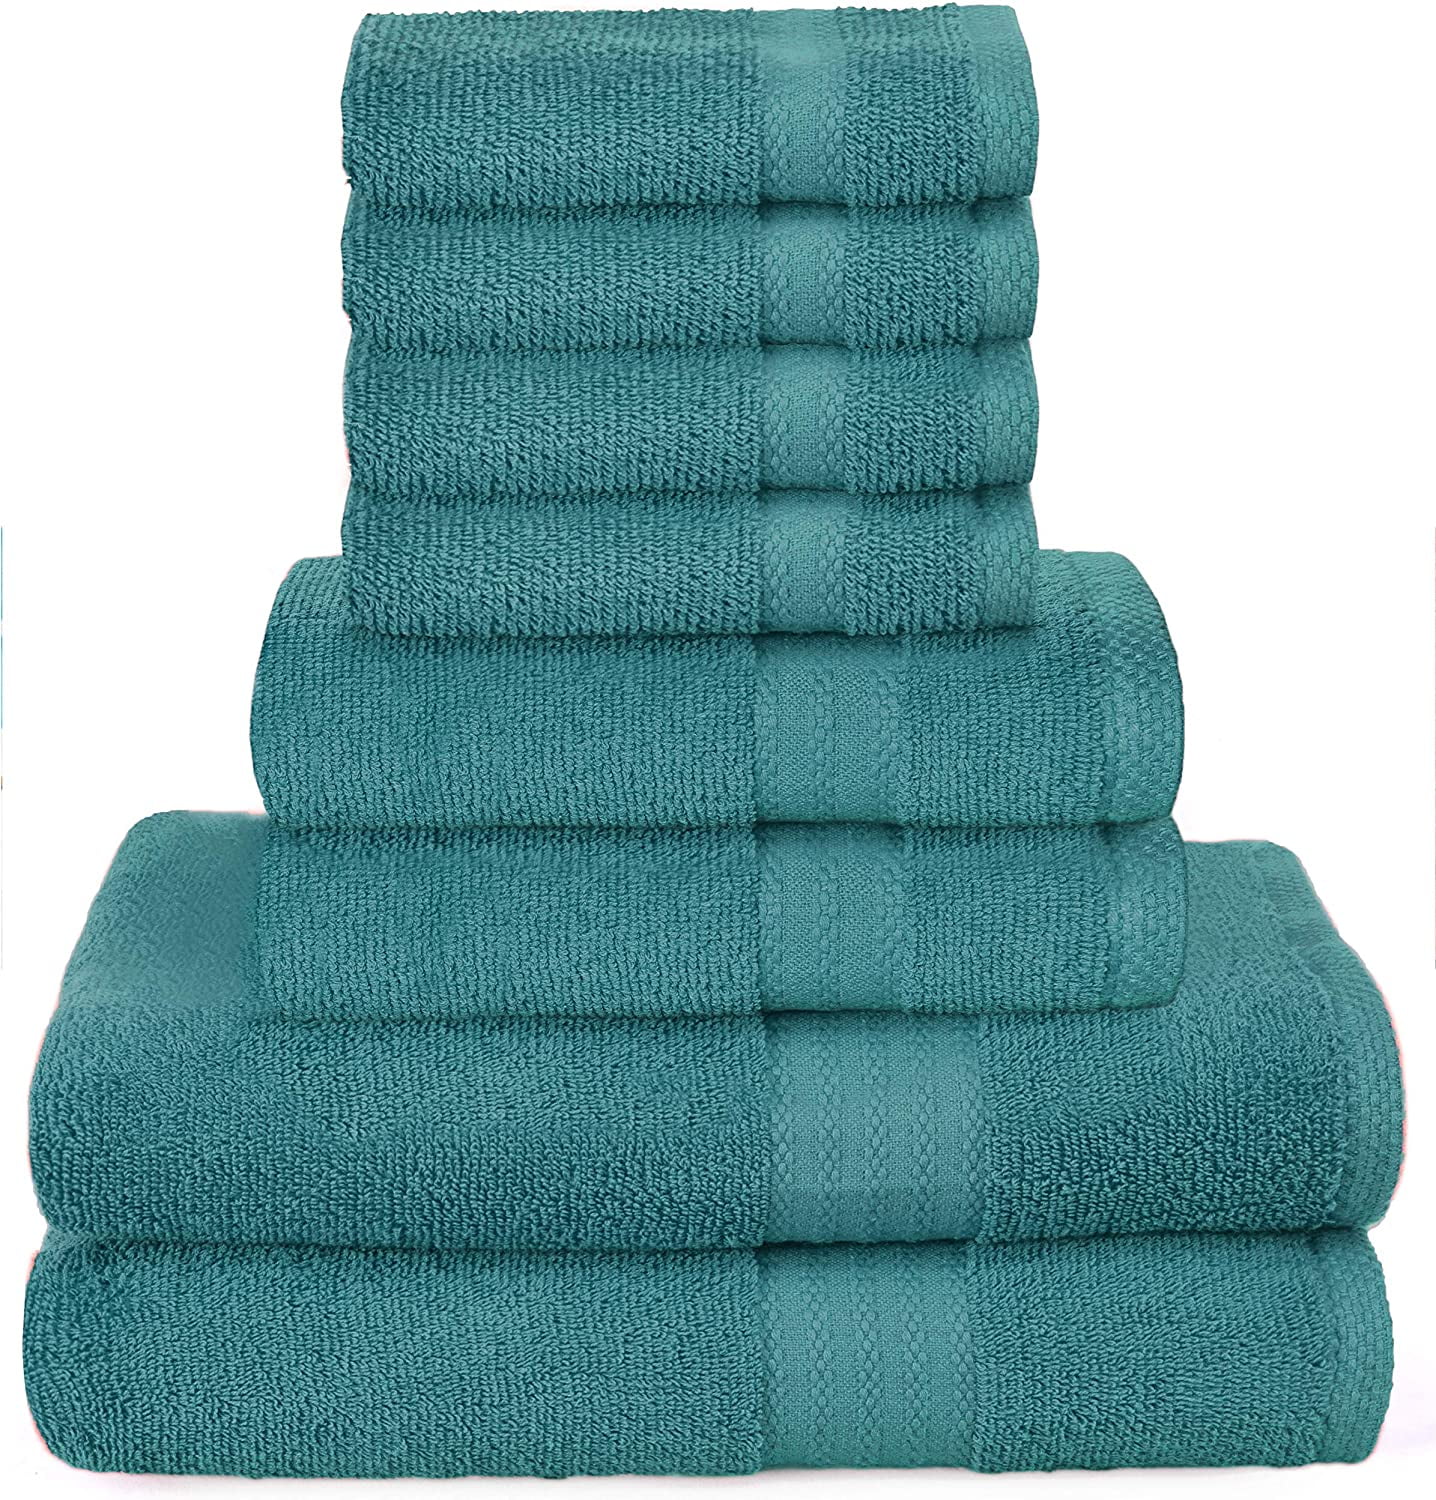 GLAMBURG 6 Piece Towel Set, 100% Combed Cotton - 2 Bath Towels, 2 Hand  Towels, 2 Wash Cloths - 600 GSM Luxury Hotel Quality Ultra Soft Highly  Absorbent Towel Set for Bathroom - Burgundy - Yahoo Shopping